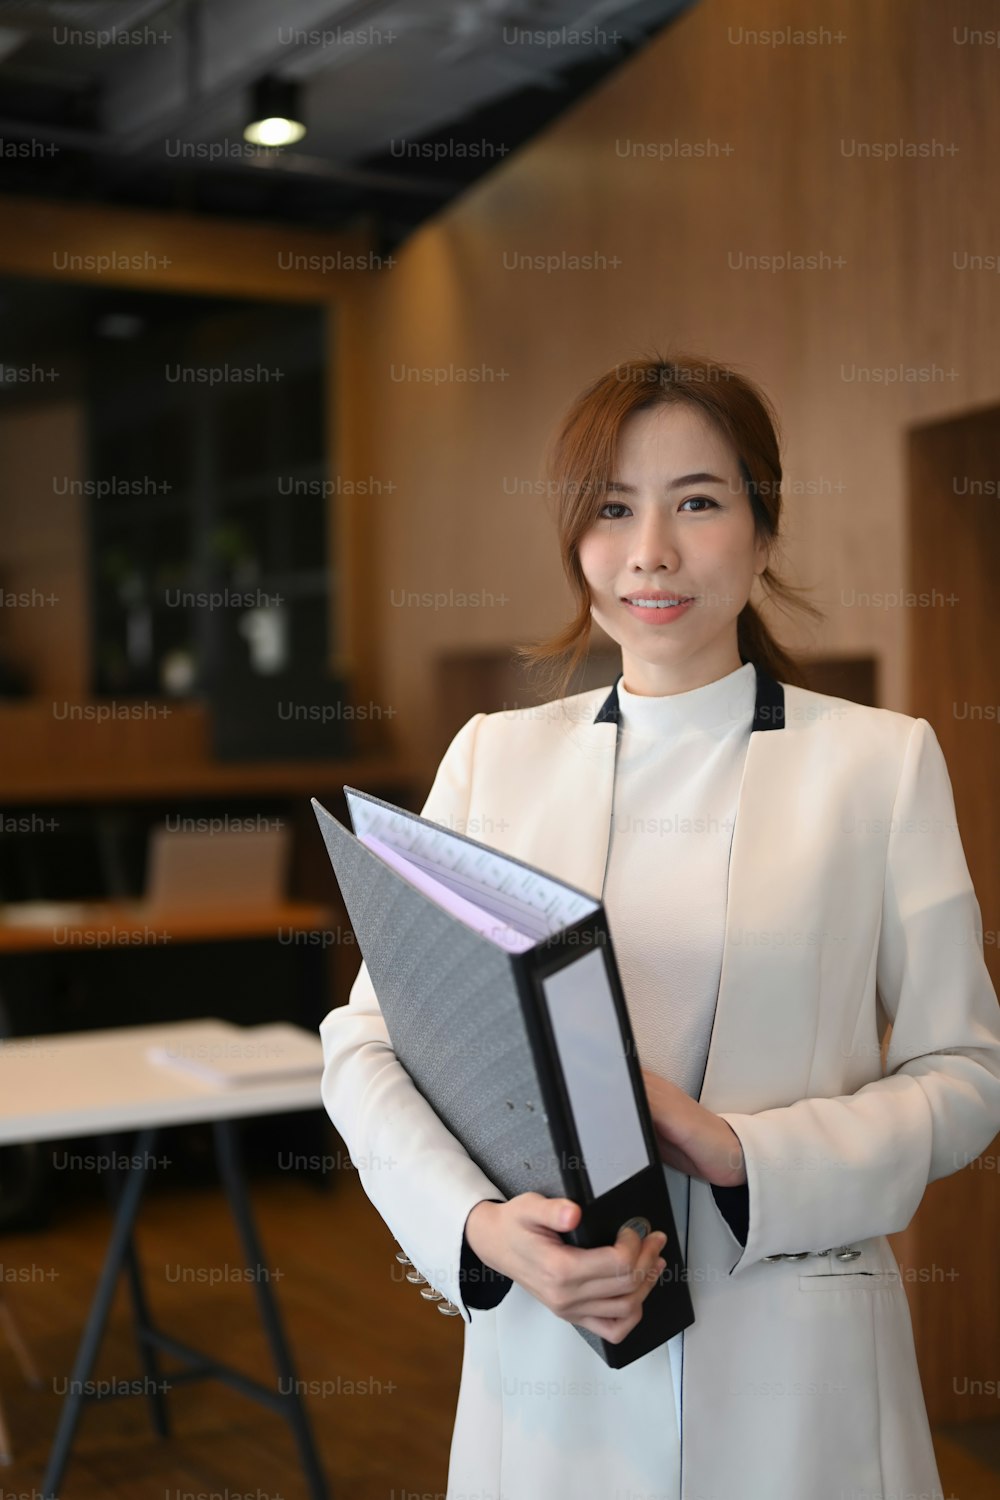 Portrait of female executive holding file folder and smiling to camera while standing in modern workplace.